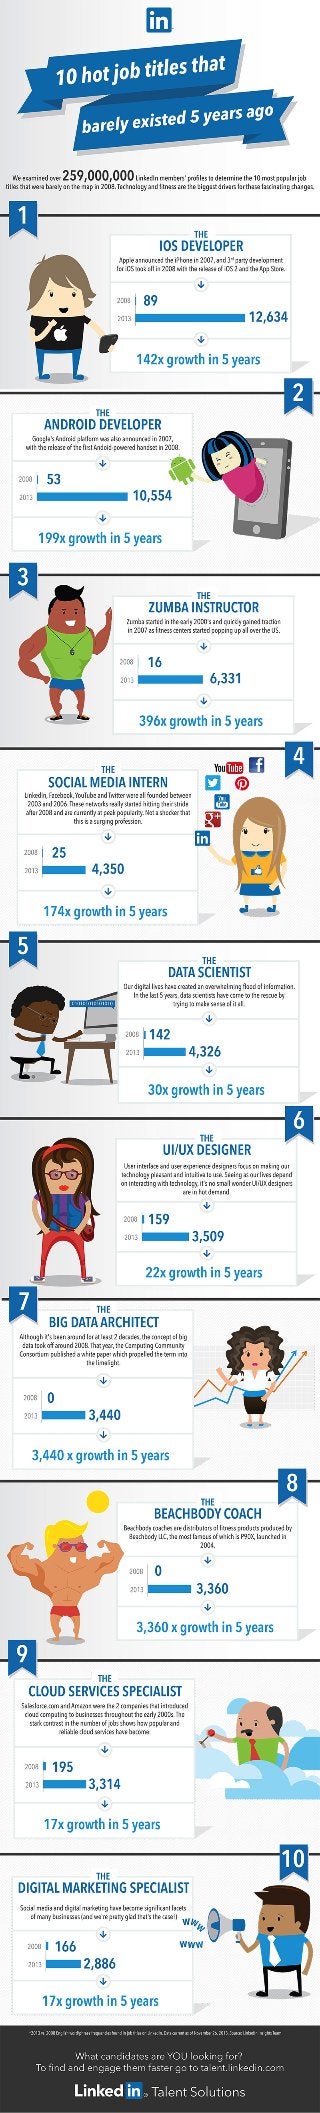 10 Job Titles That Didn't Exist 5 Years Ago | Infographic